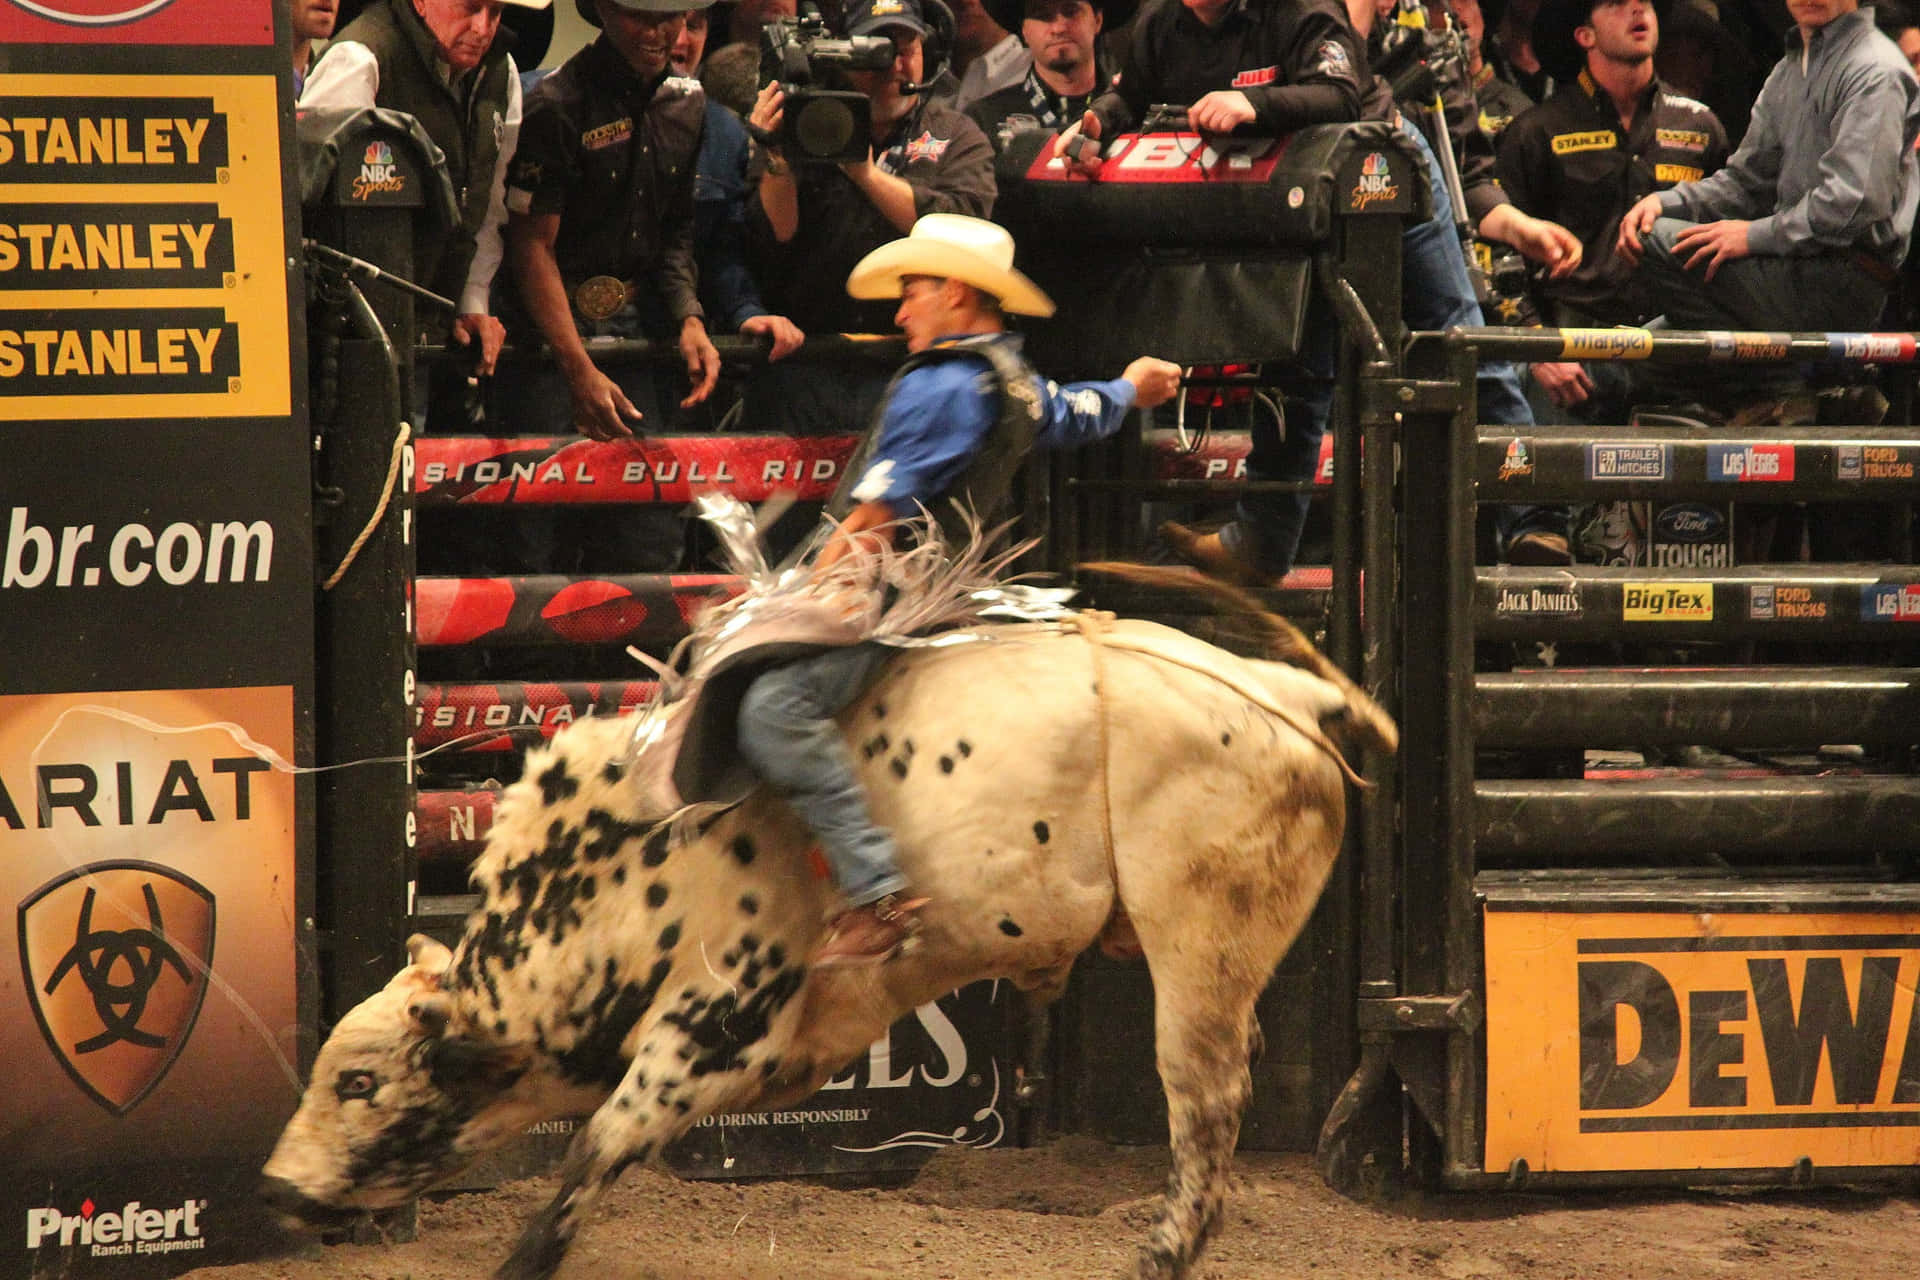 Bull Riding is an Adrenaline-Fueled and Thrilling Western Sport